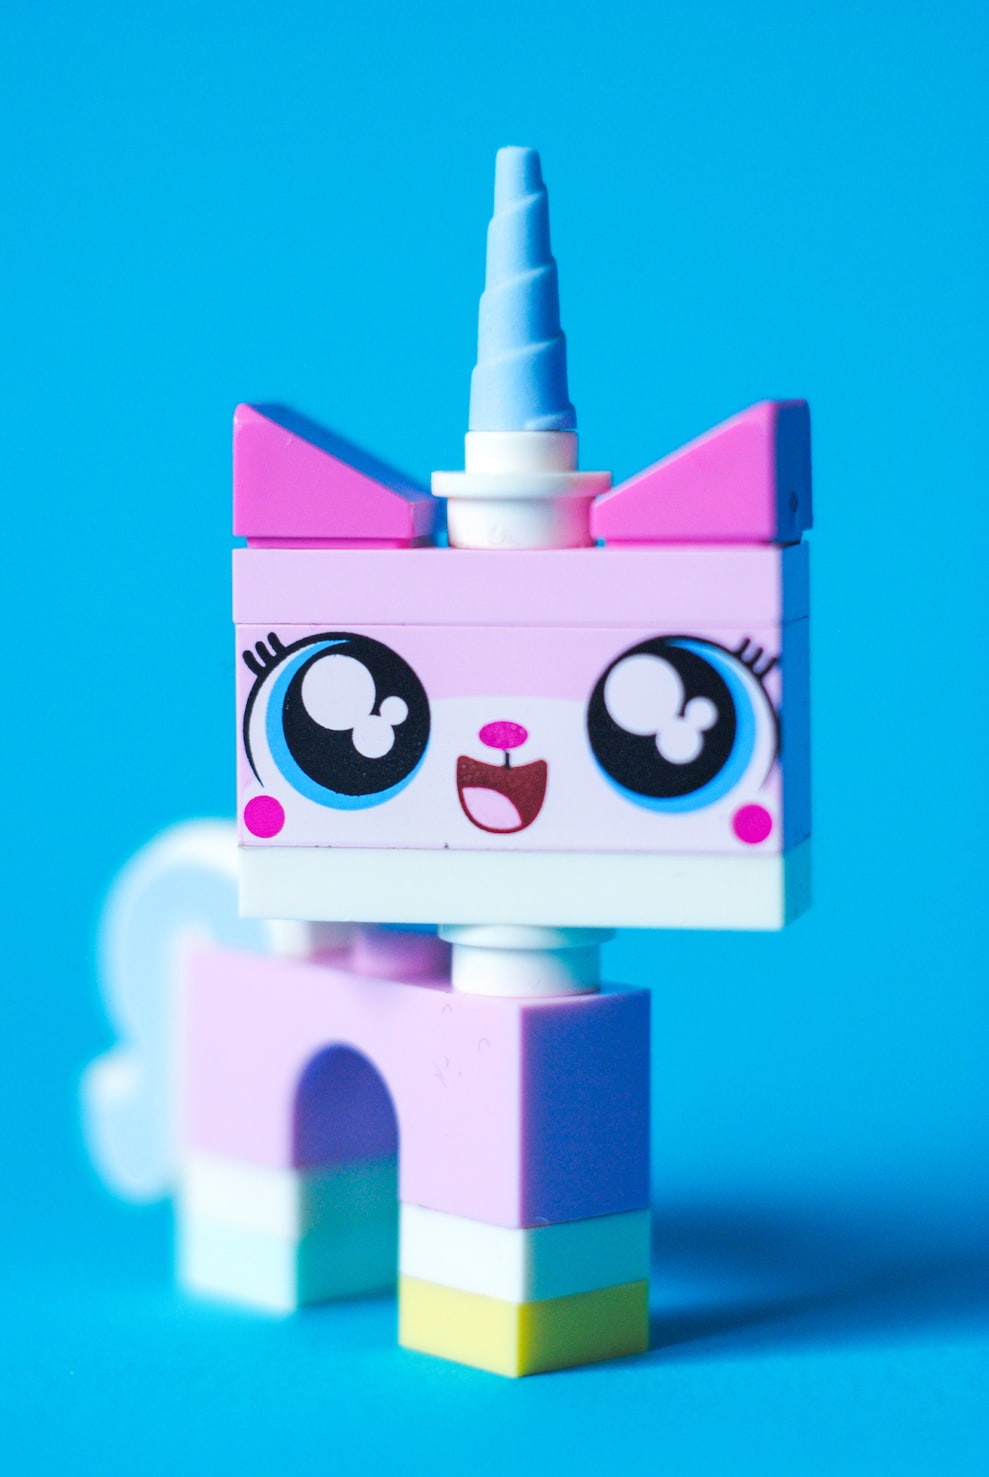 Unicorn Platform and Shoprocket: The Perfect Pair for E-Commerce